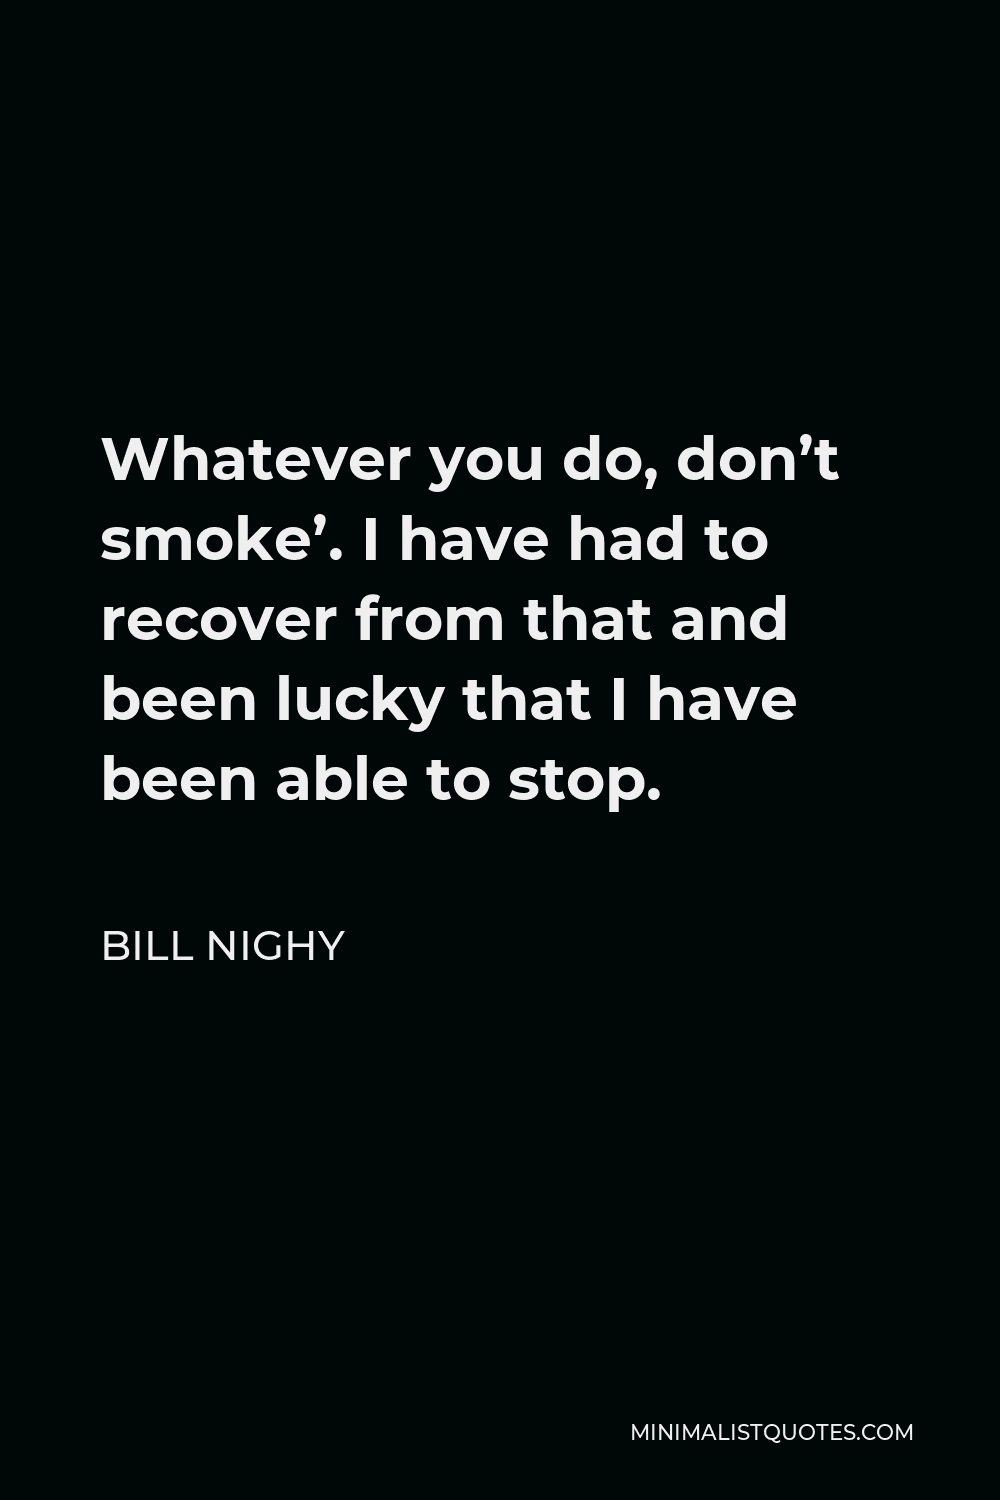 Bill Nighy Quote - Whatever you do, don’t smoke’. I have had to recover from that and been lucky that I have been able to stop.